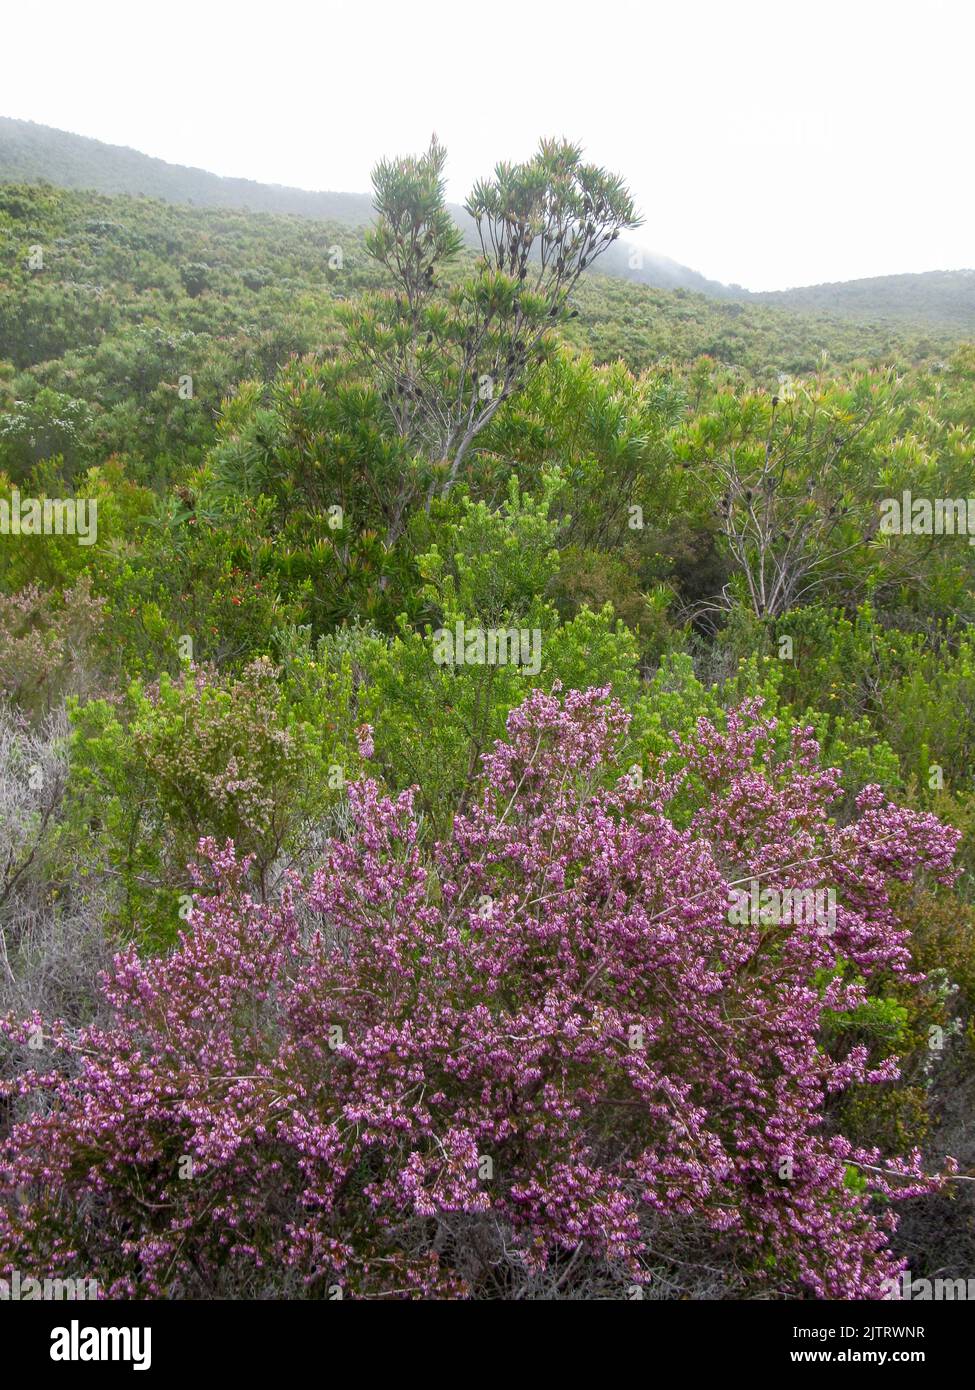 View over the fynbos covered high ridges of the Tsitsikamma Mountains of South Africa, with pink ericas in full bloom in the foreground. Stock Photo